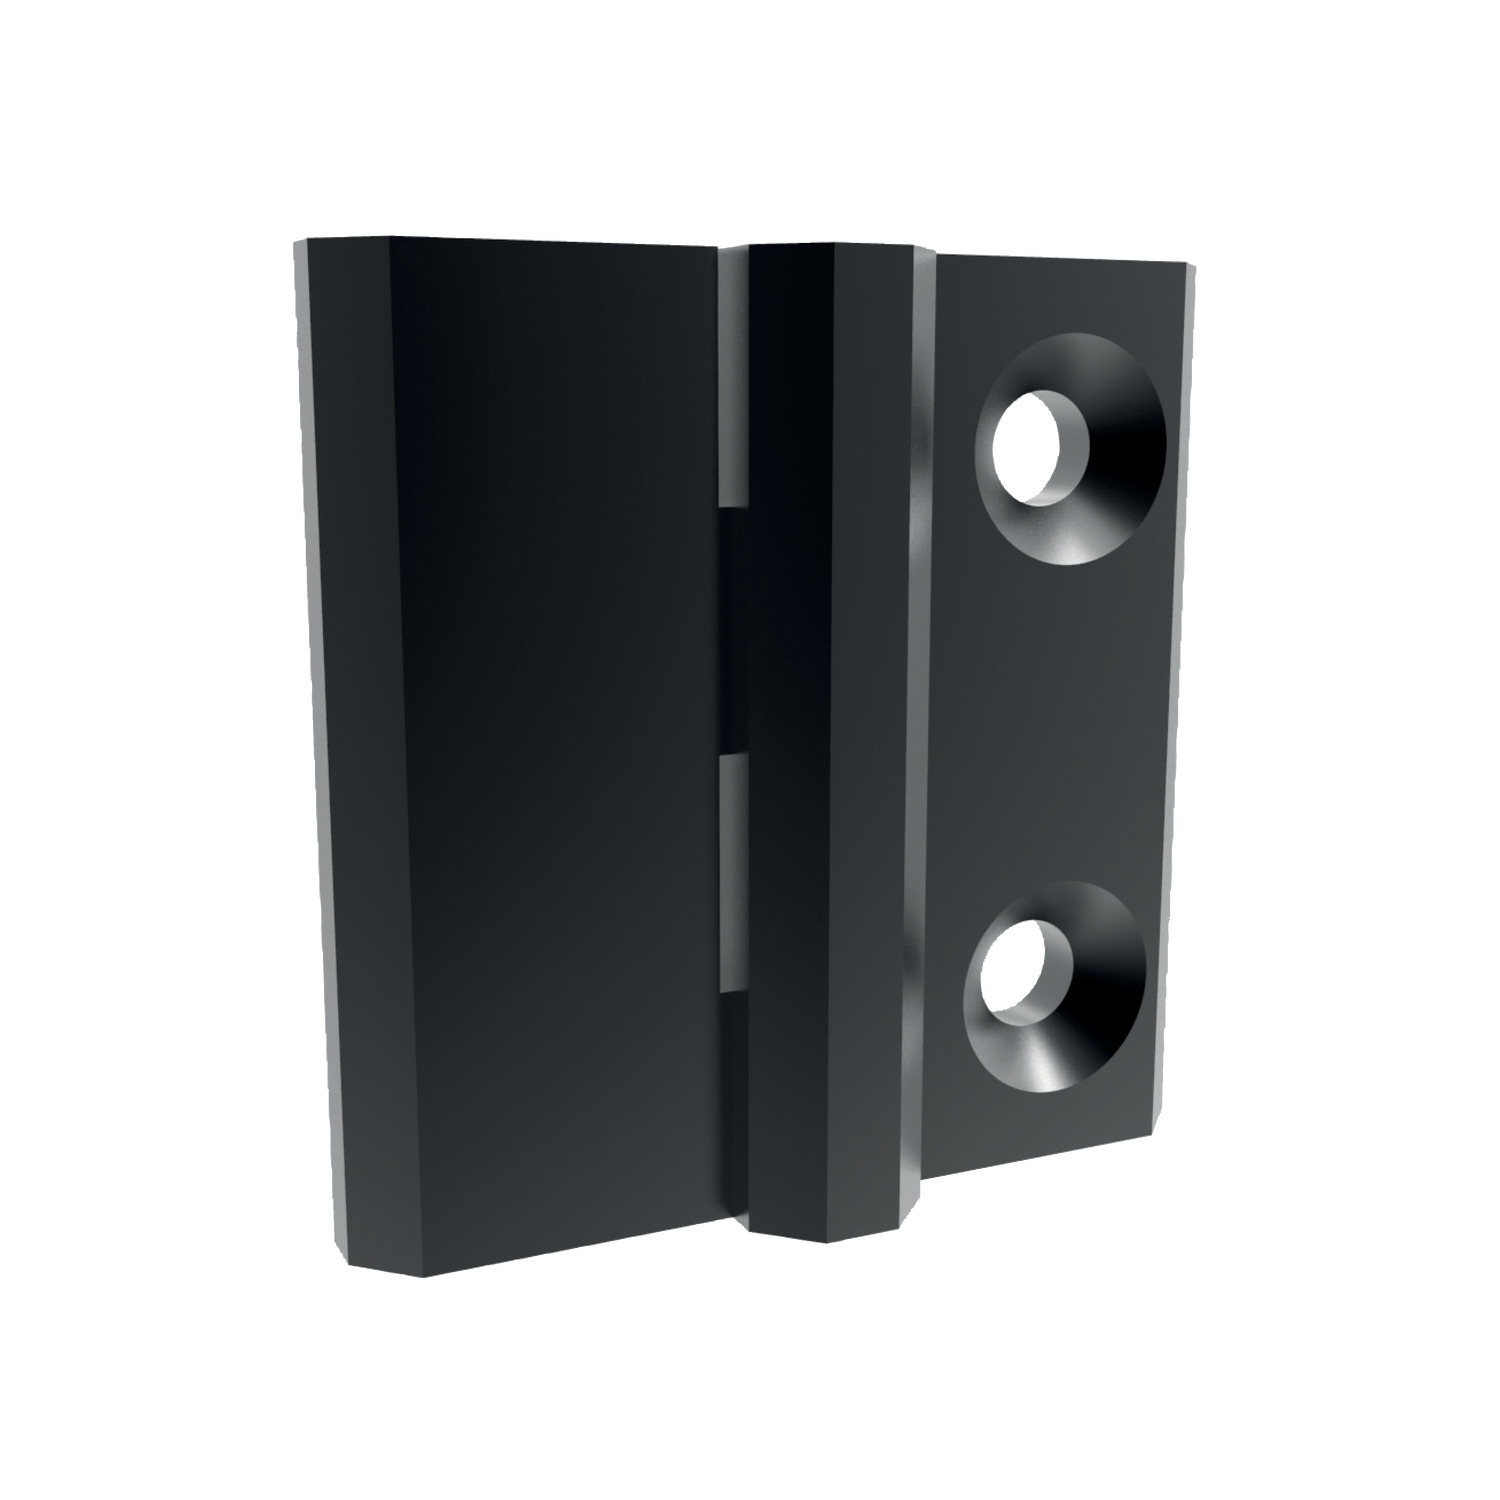 Surface Mount - Leaf Hinges Rear mounting external hinges. Chrome and black coated available. For plain/flush mounted doors.